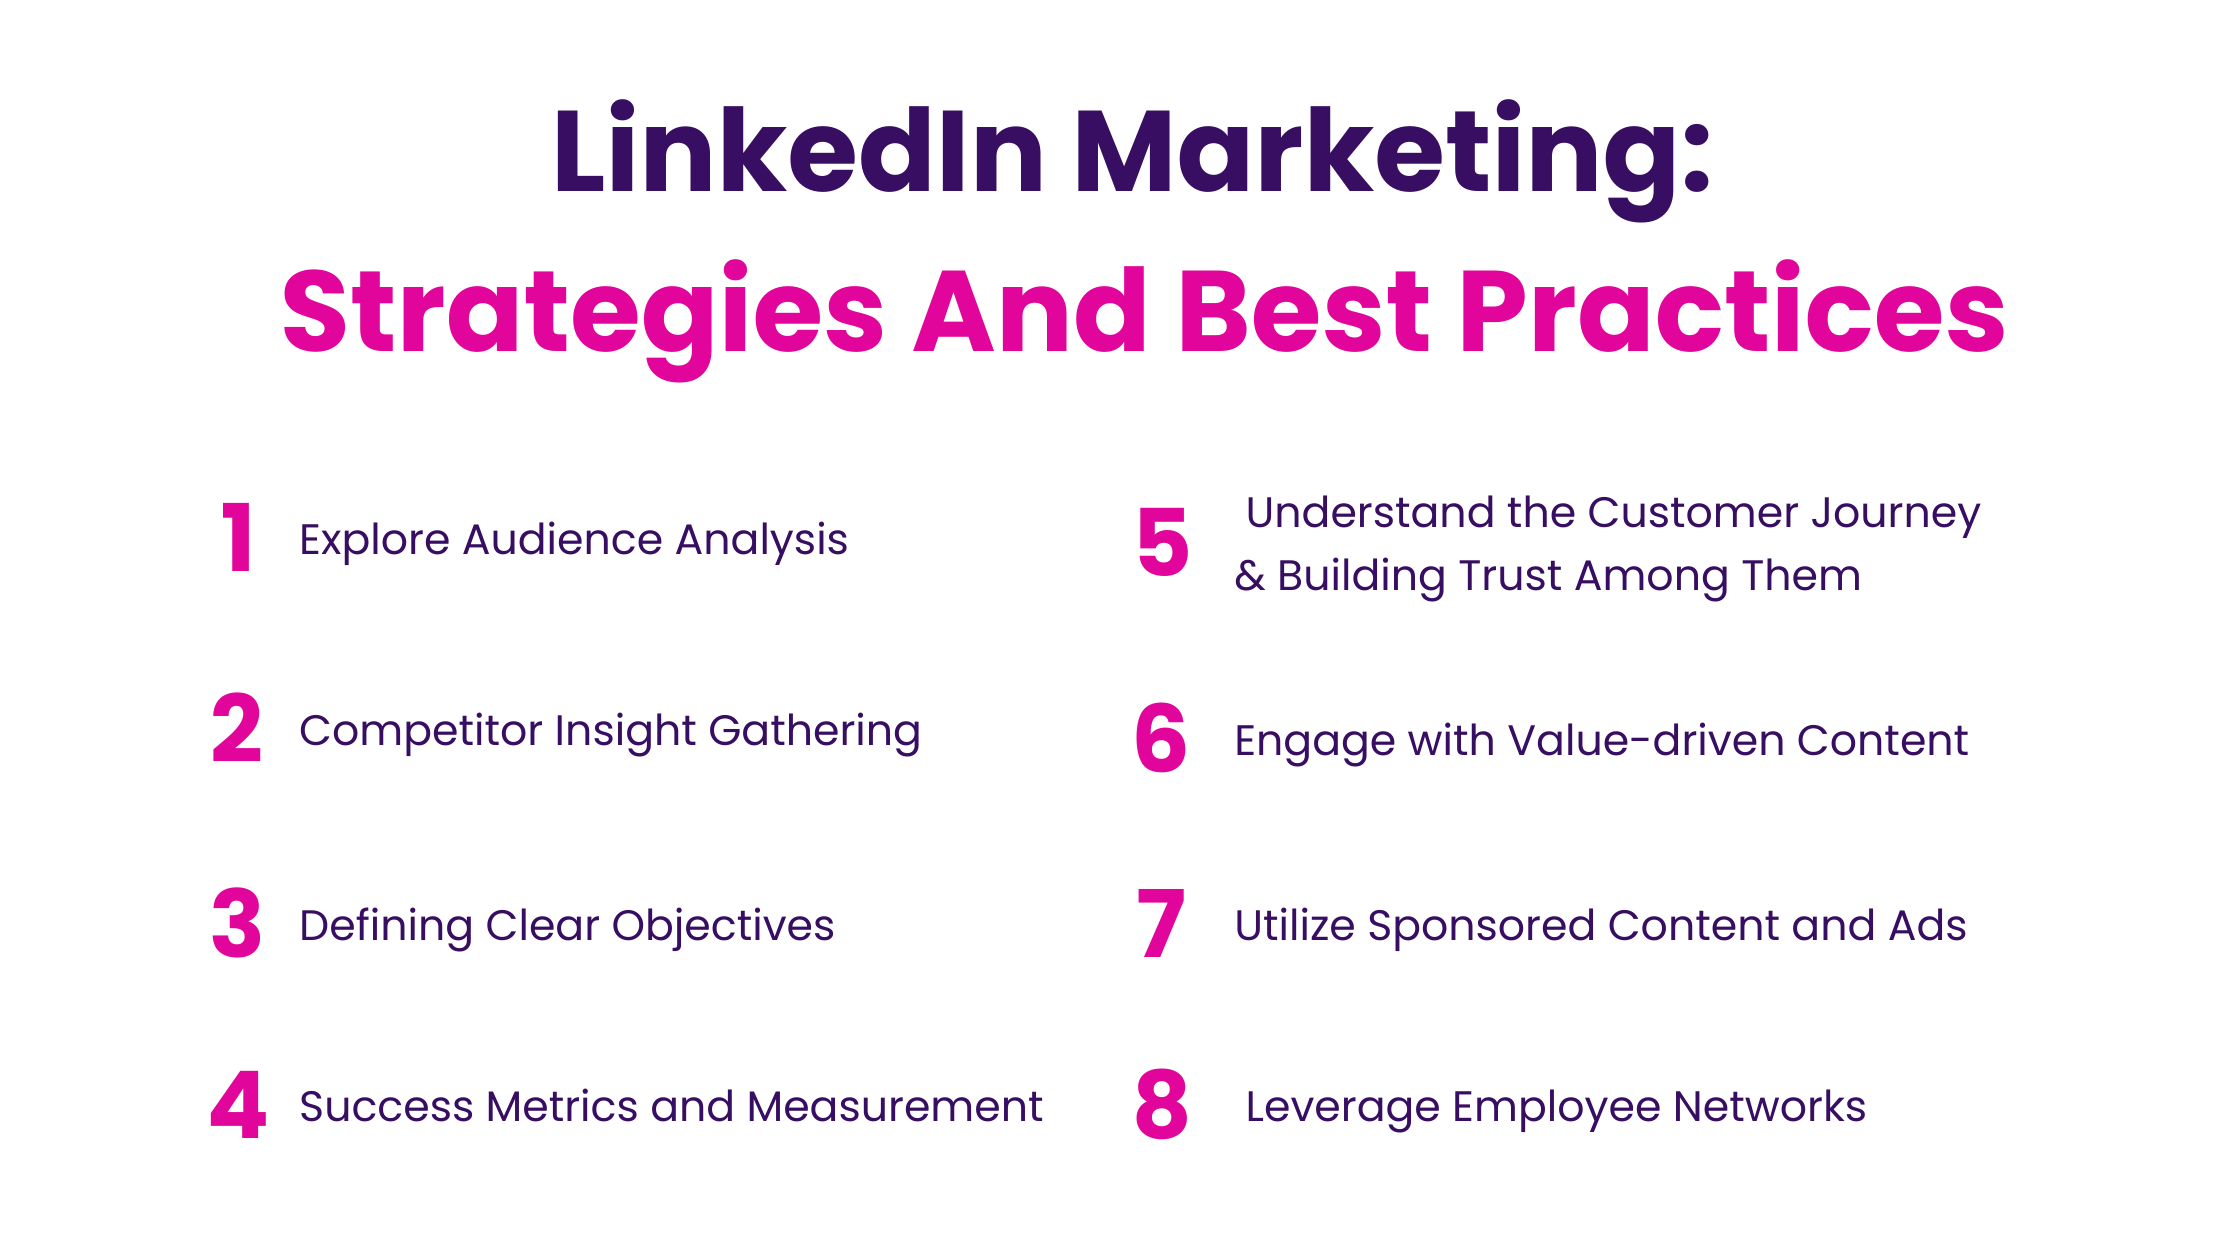 LinkedIn Marketing Strategies And Best Practices